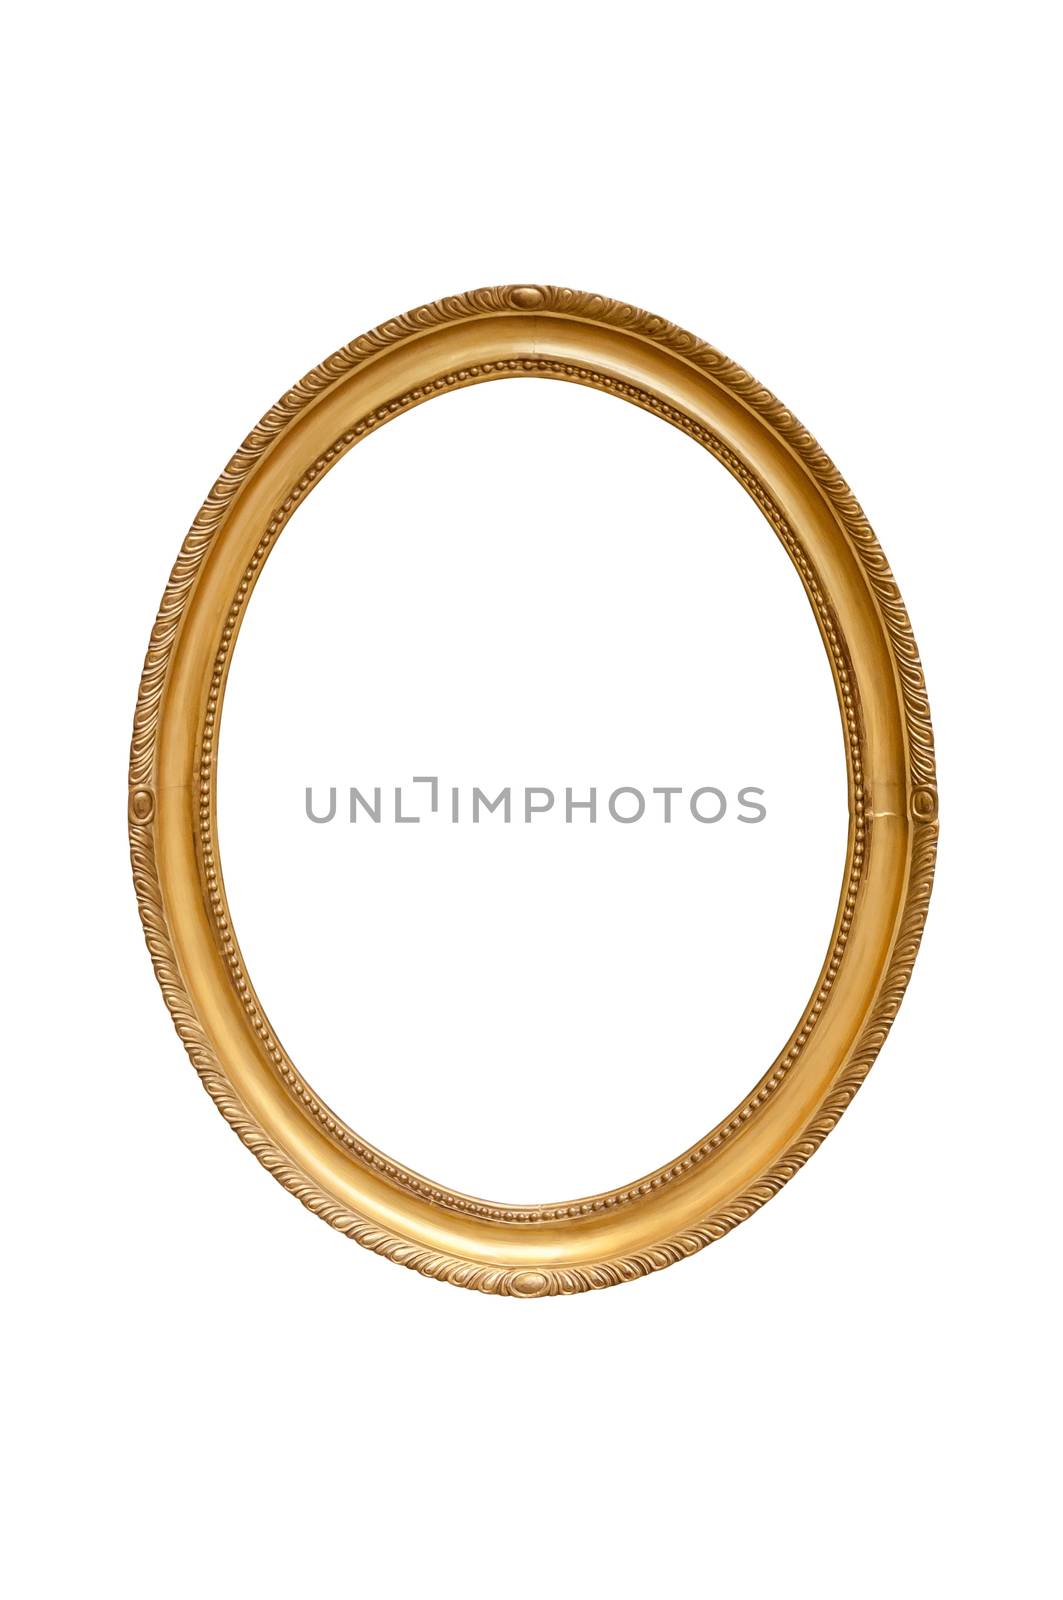 Oval decorative picture frame isolated on white background with clipping path